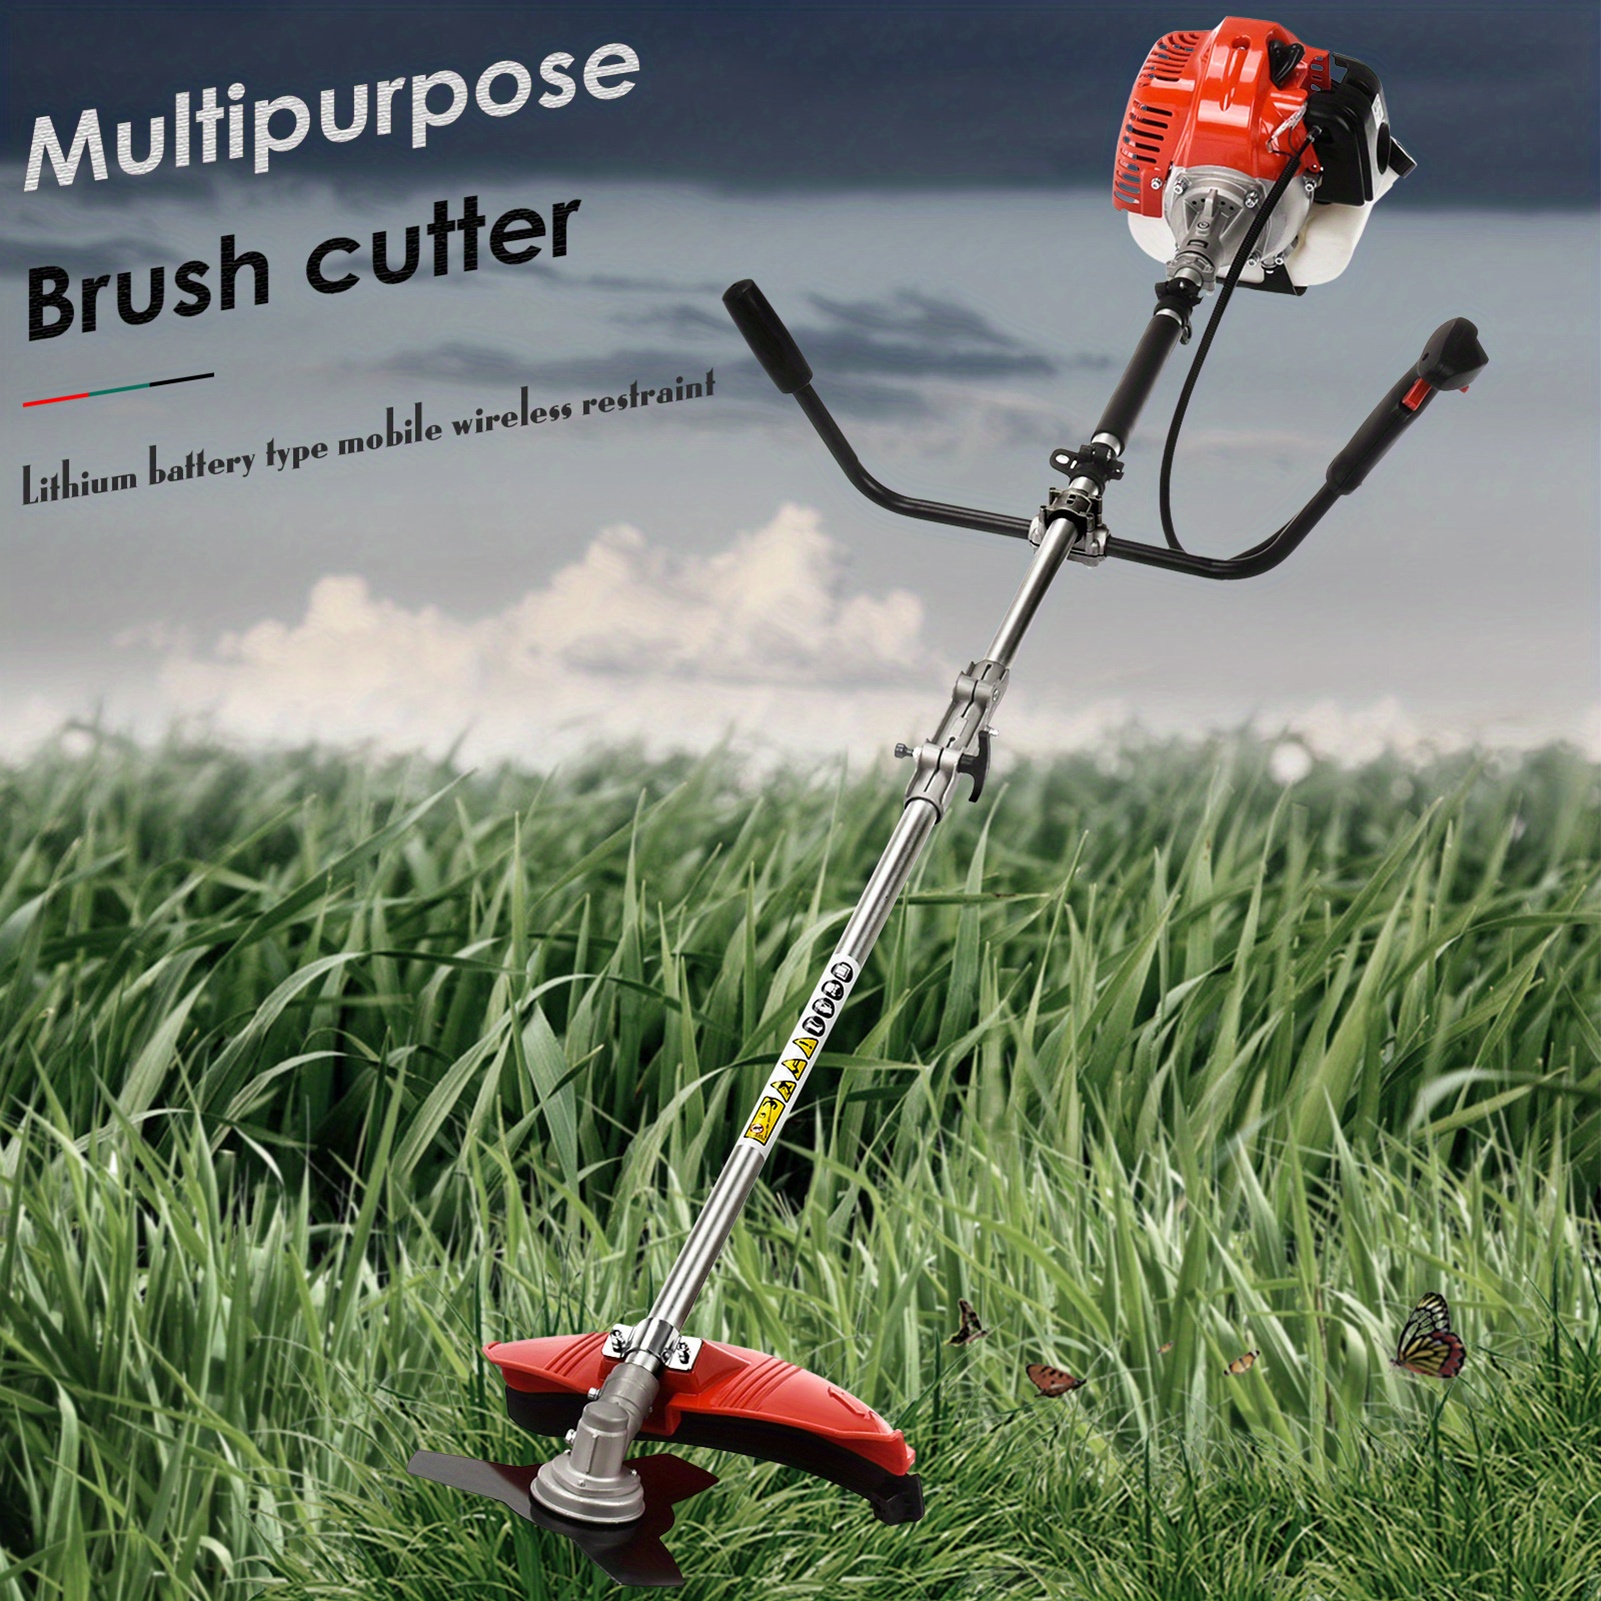 

Gas-powered Brush Cutter And , 2-in-1 Multifunctional 70.86 X 13.77 Inches, Portable Back-carried Farm Machine, Cordless Strimmer Lawn Edger, Garden Lawn Yard Maintenance Tool